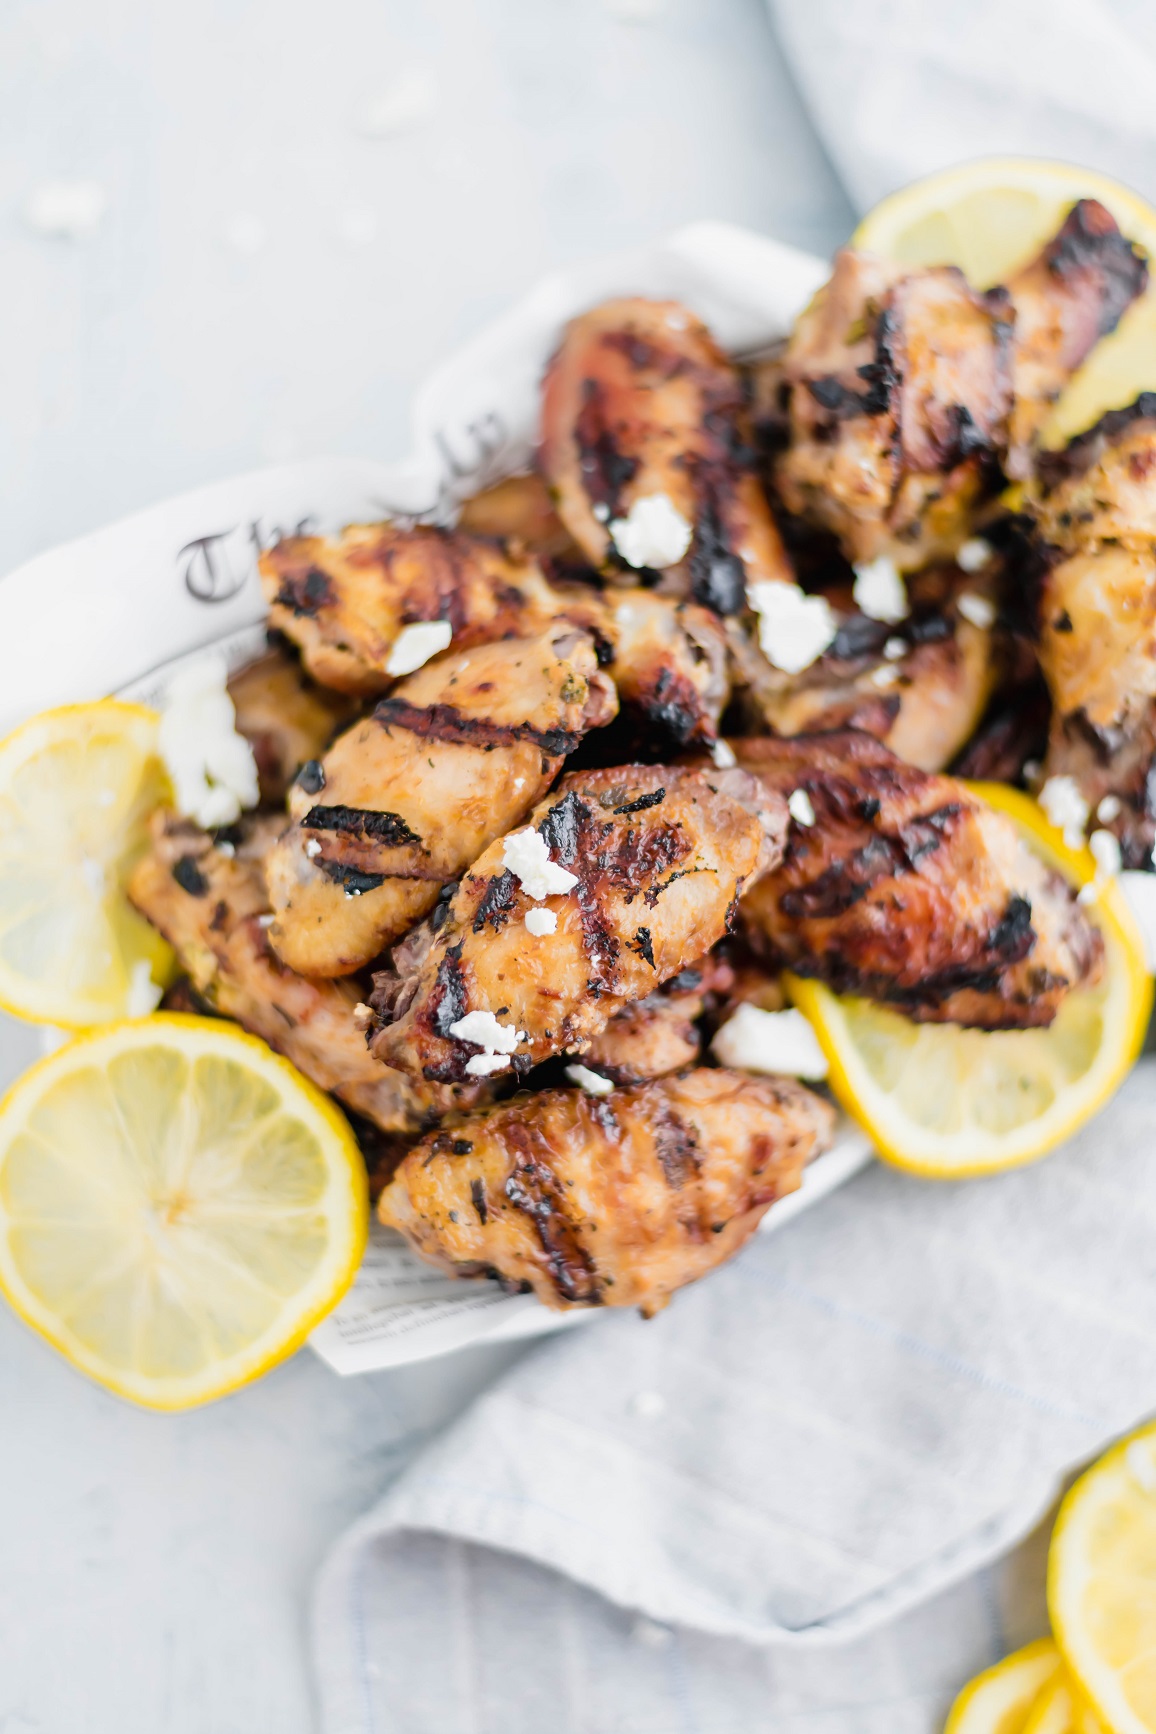 Basket of grilled Greek chicken wings garnished with crumbled feta and thin lemon slices. Gray striped napkin in bottom right corner.